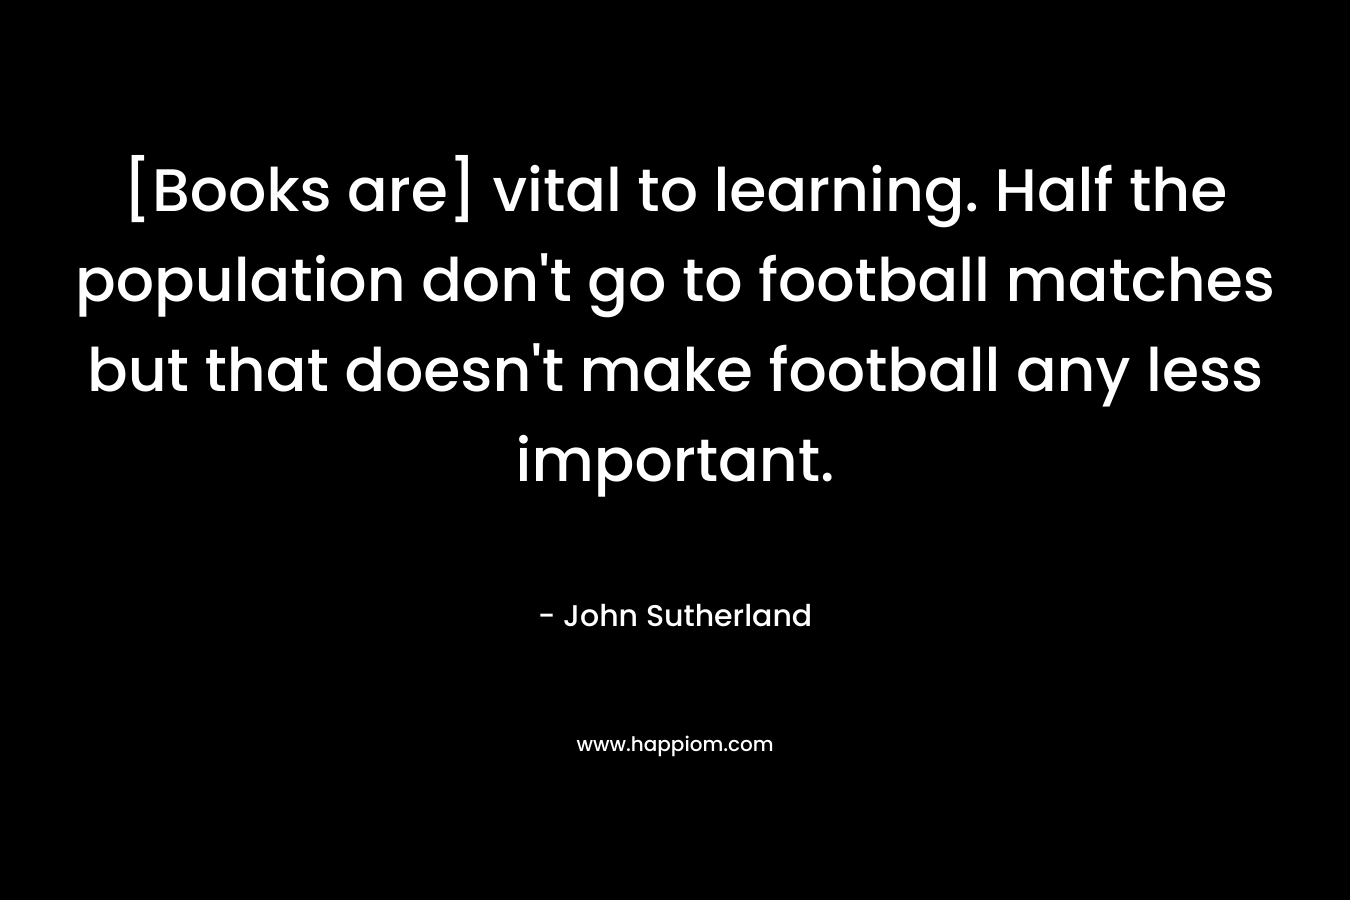 [Books are] vital to learning. Half the population don't go to football matches but that doesn't make football any less important.